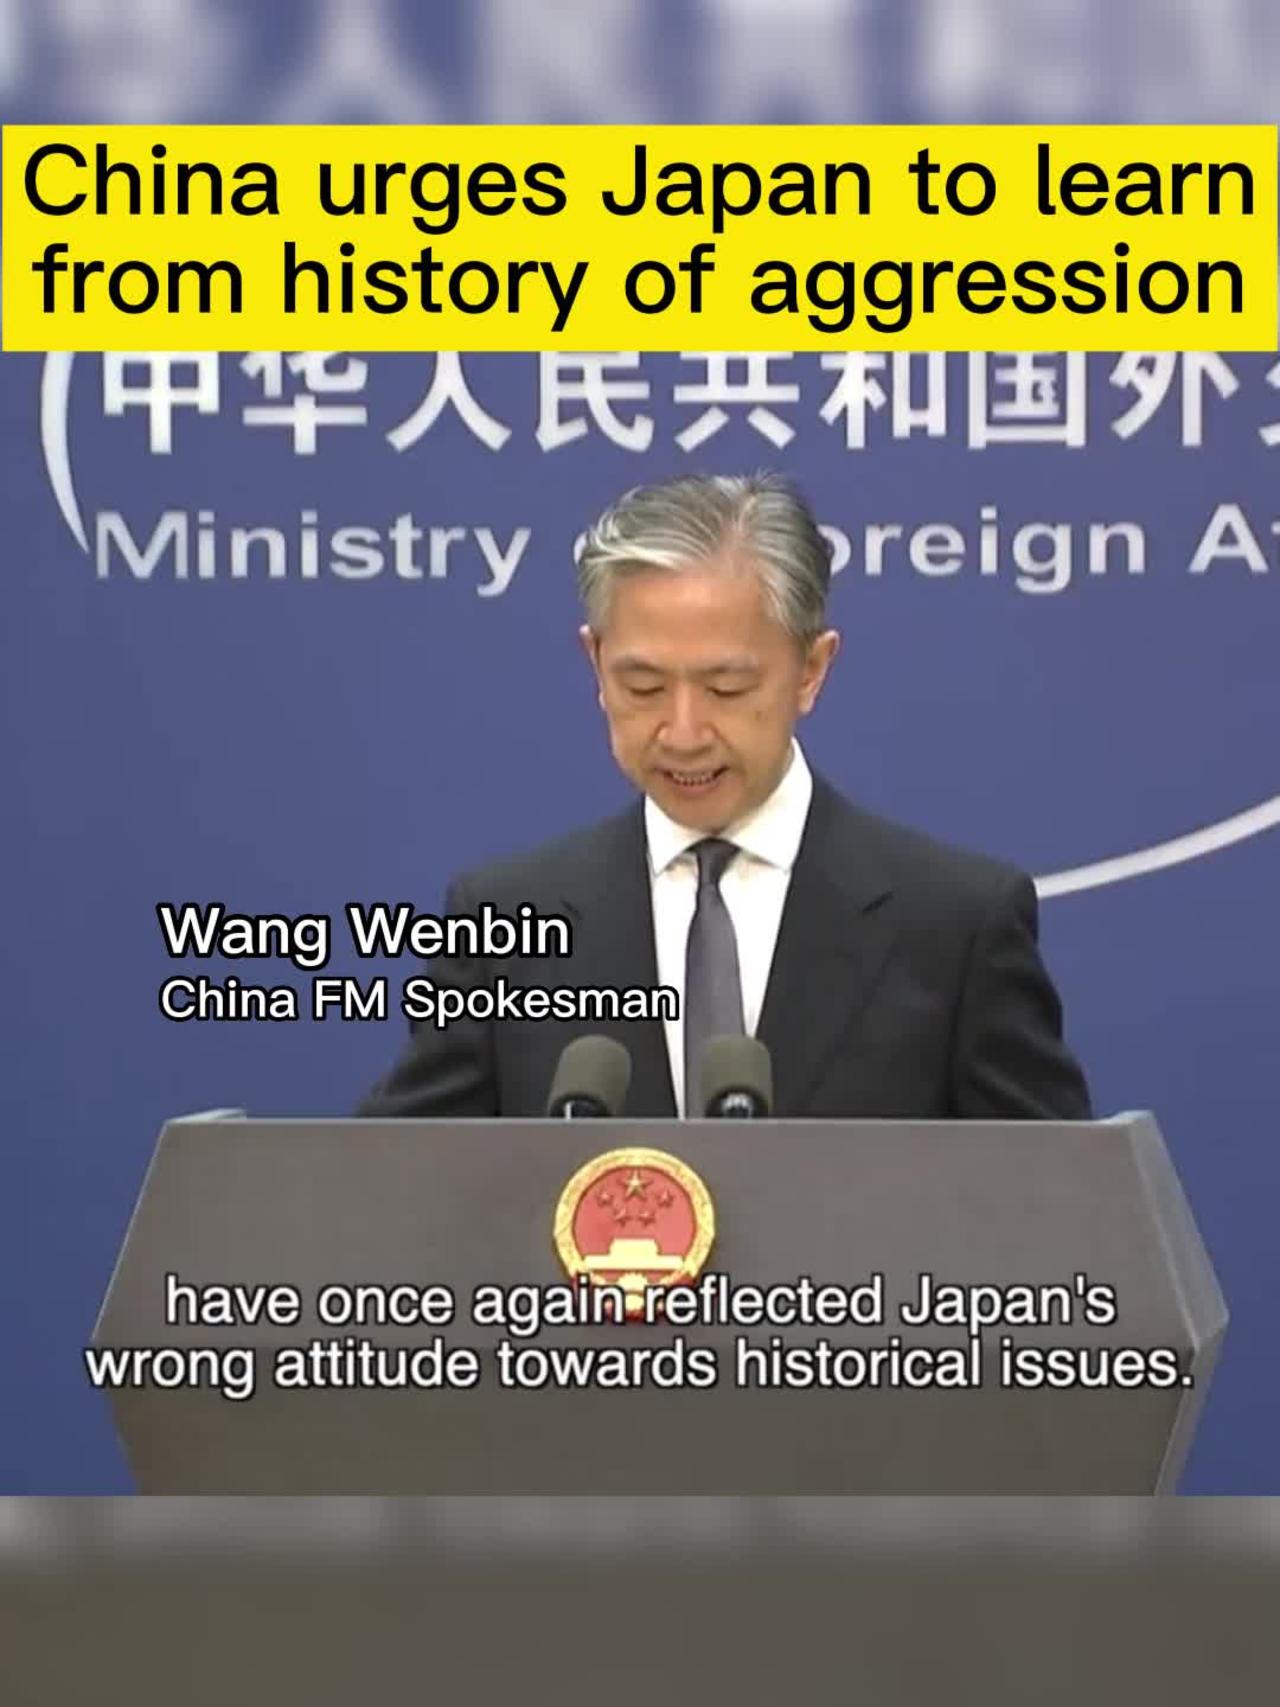 China urges Japan to draw lessons from its history of aggression